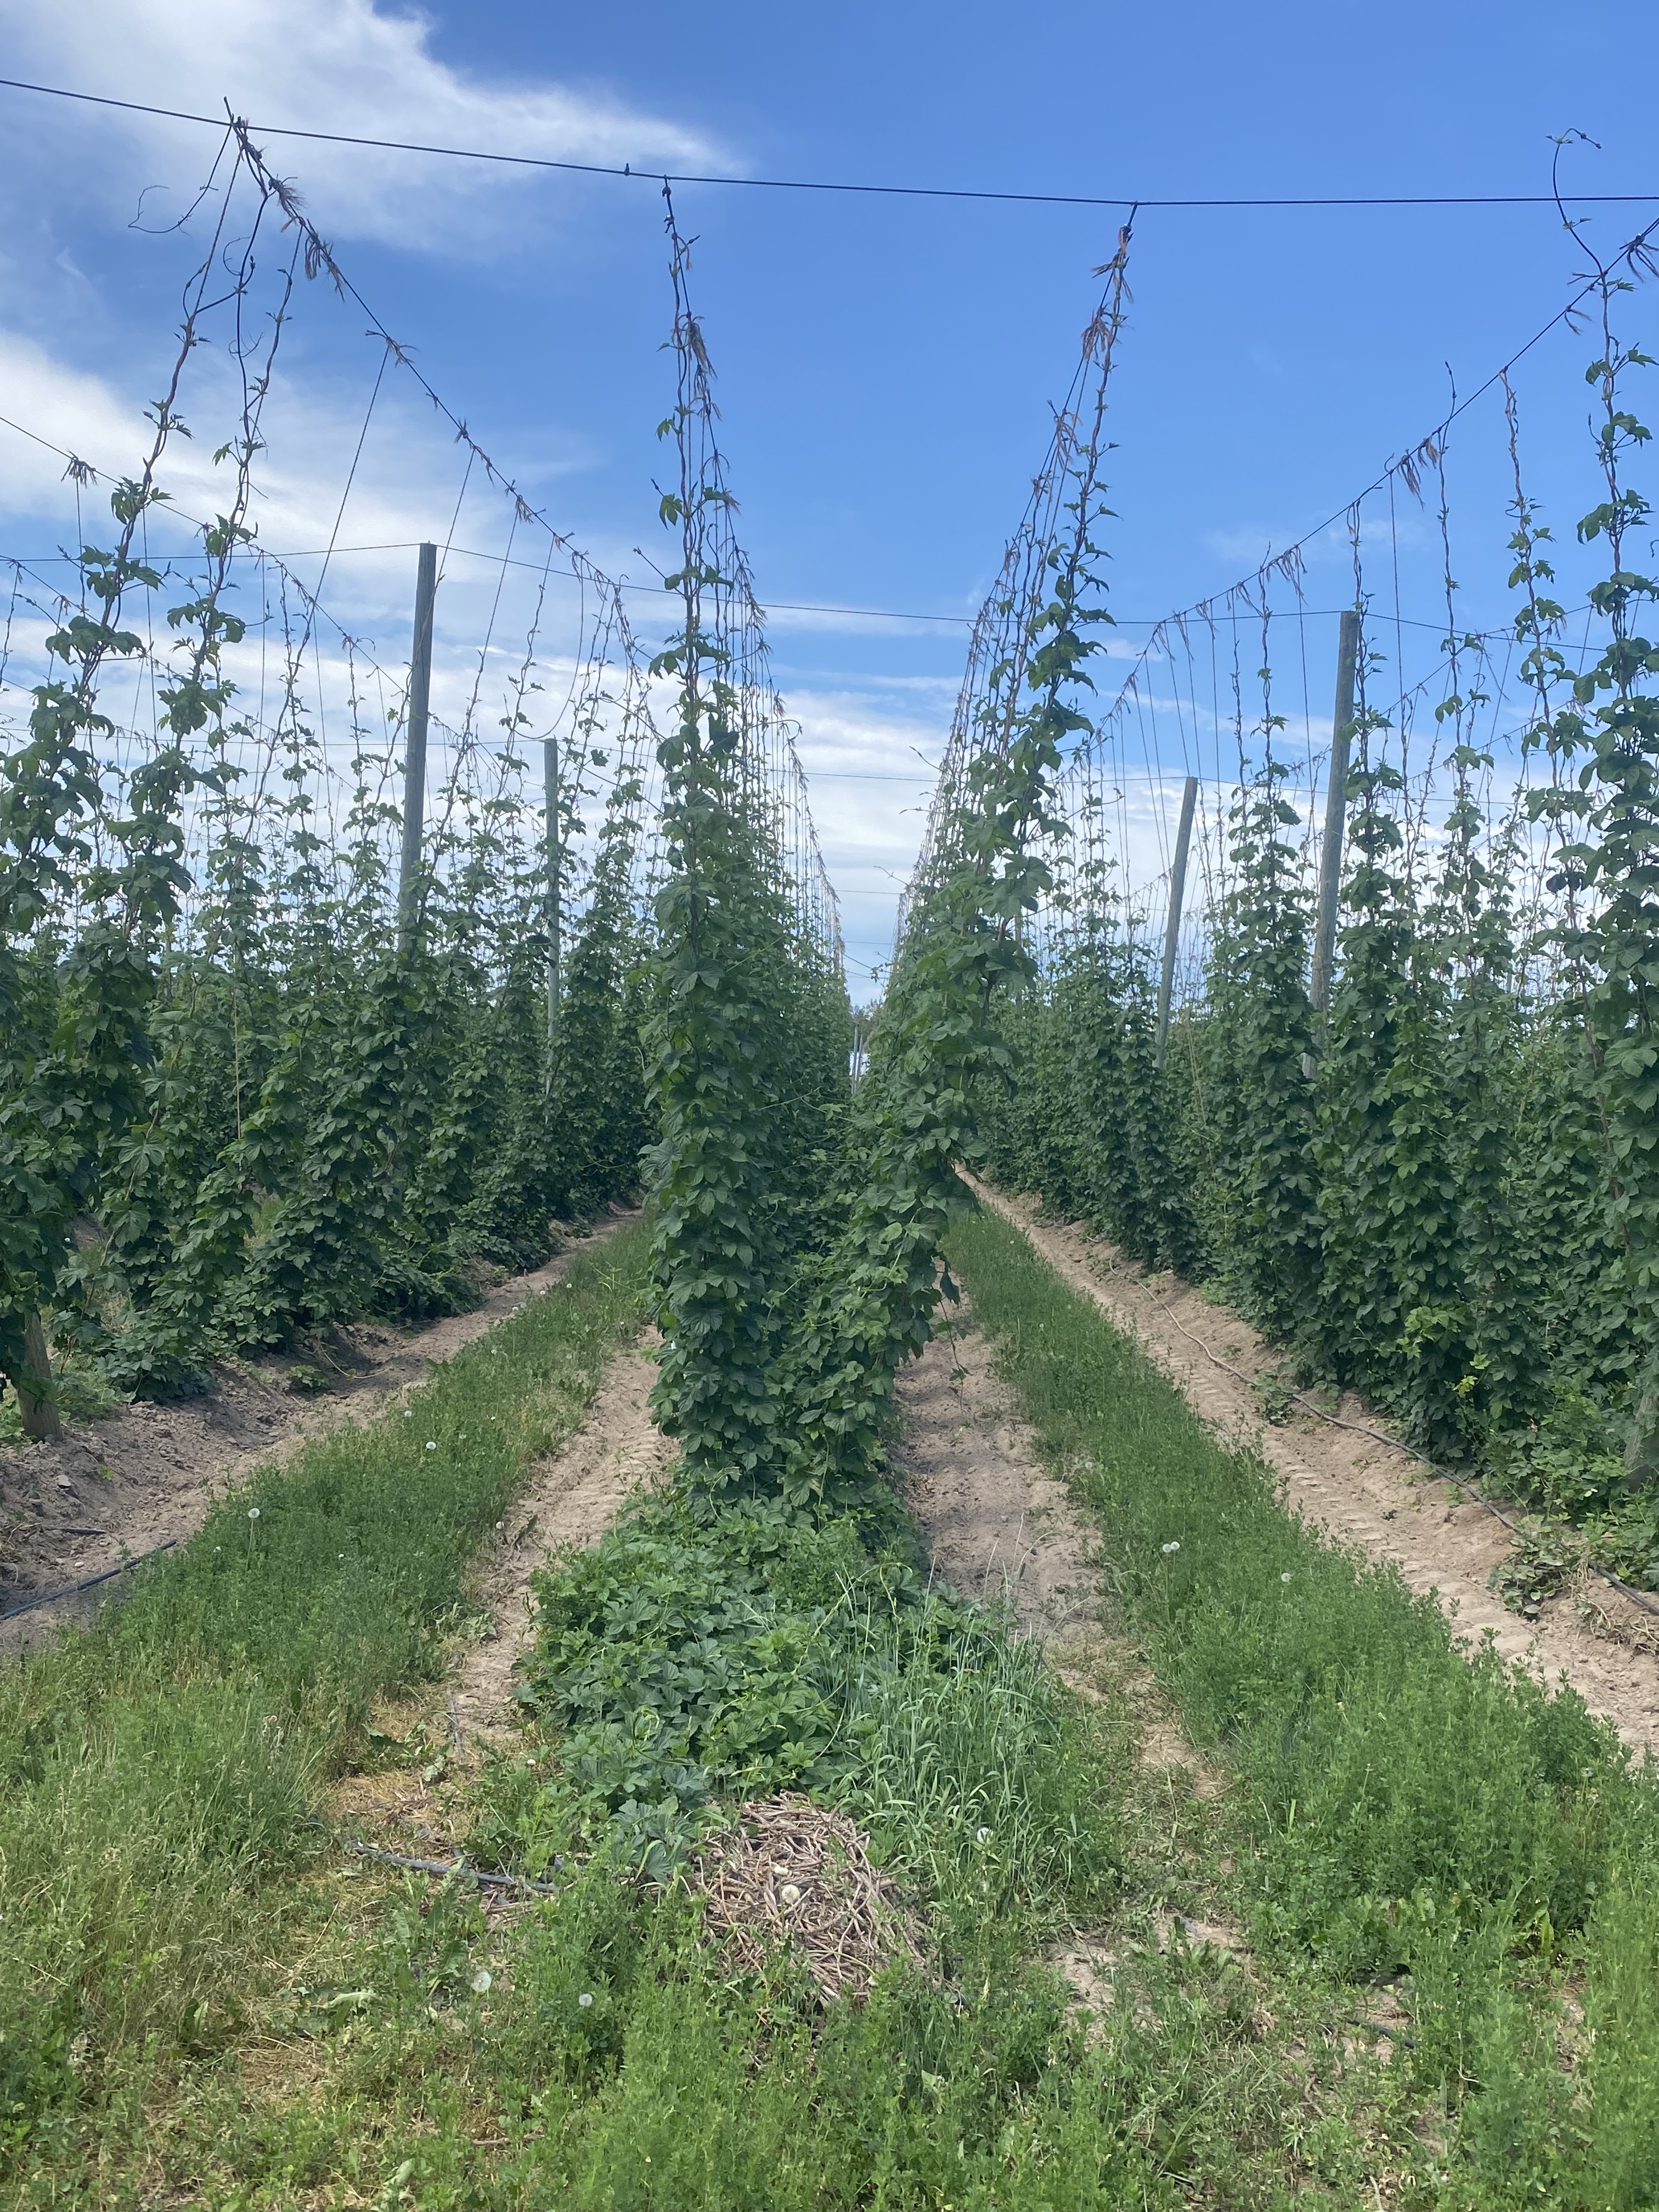 Hops growing close to top of wire.